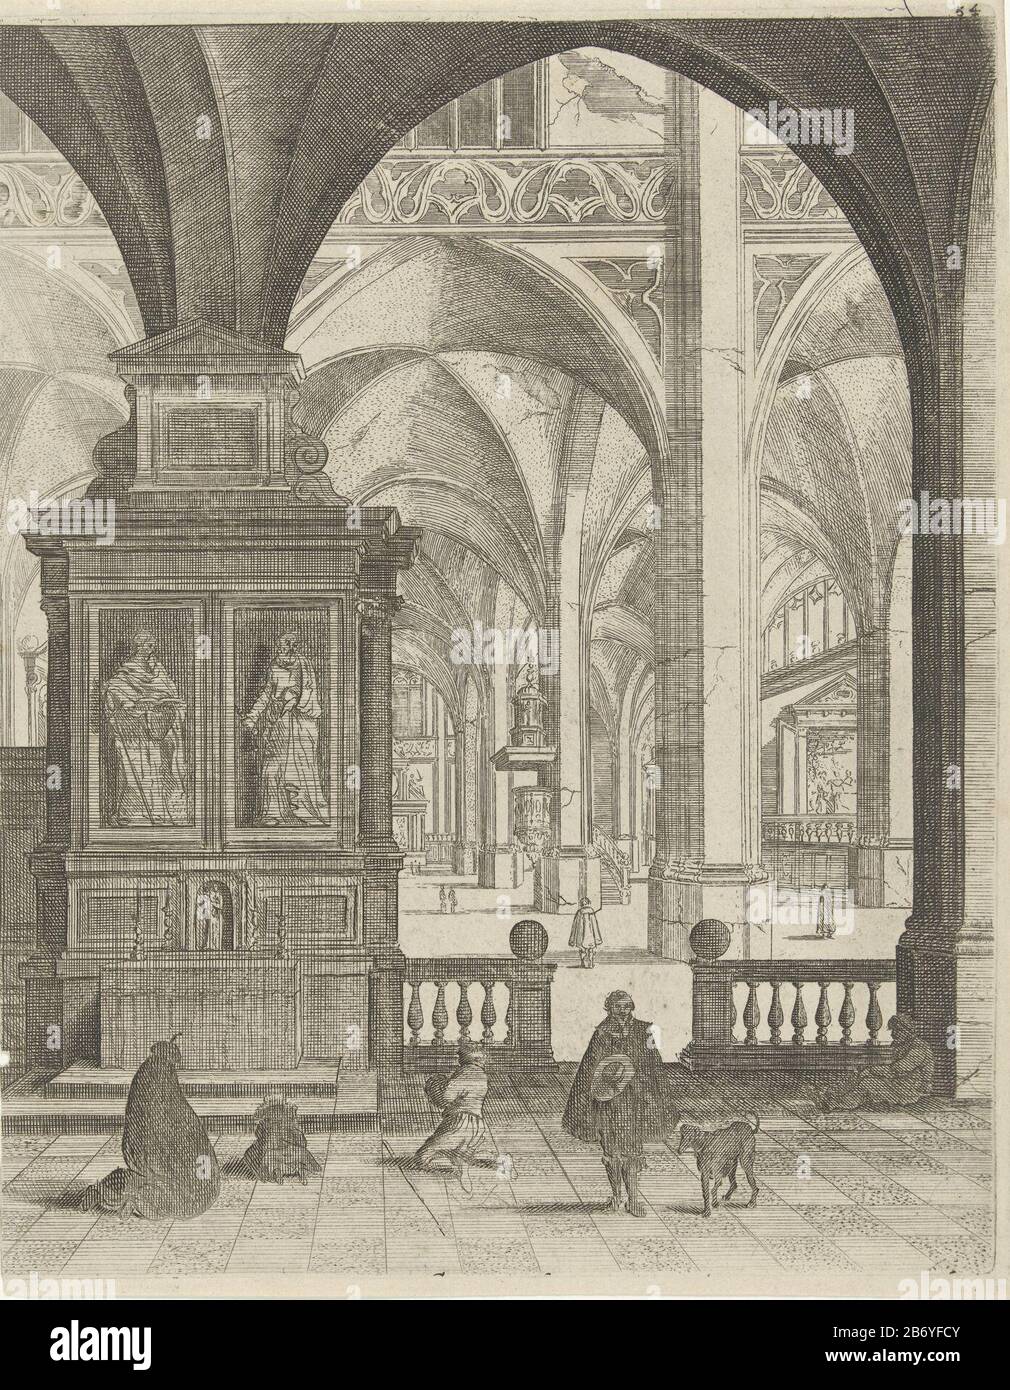 Kerkinterieur Figures in a Gothic church interior. Upper right labeled: 54. Manufacturer : printmaker: Gerard Houckgeest to design: Bartholomew Bass Place manufacture: Northern Netherlands Date: 1610 - 1661 Physical features: etching and engra material: paper Technique: etching / engra (printing process) Dimensions: plate edge: H 251 mm (at right cut) b × 199 mmToelichtingPrent used: Symon Bosboom, Cort onderwys Vande VYF colomen. Amsterdam: Justus Danckertsz, 1686. Subject: interior of church and Stock Photo